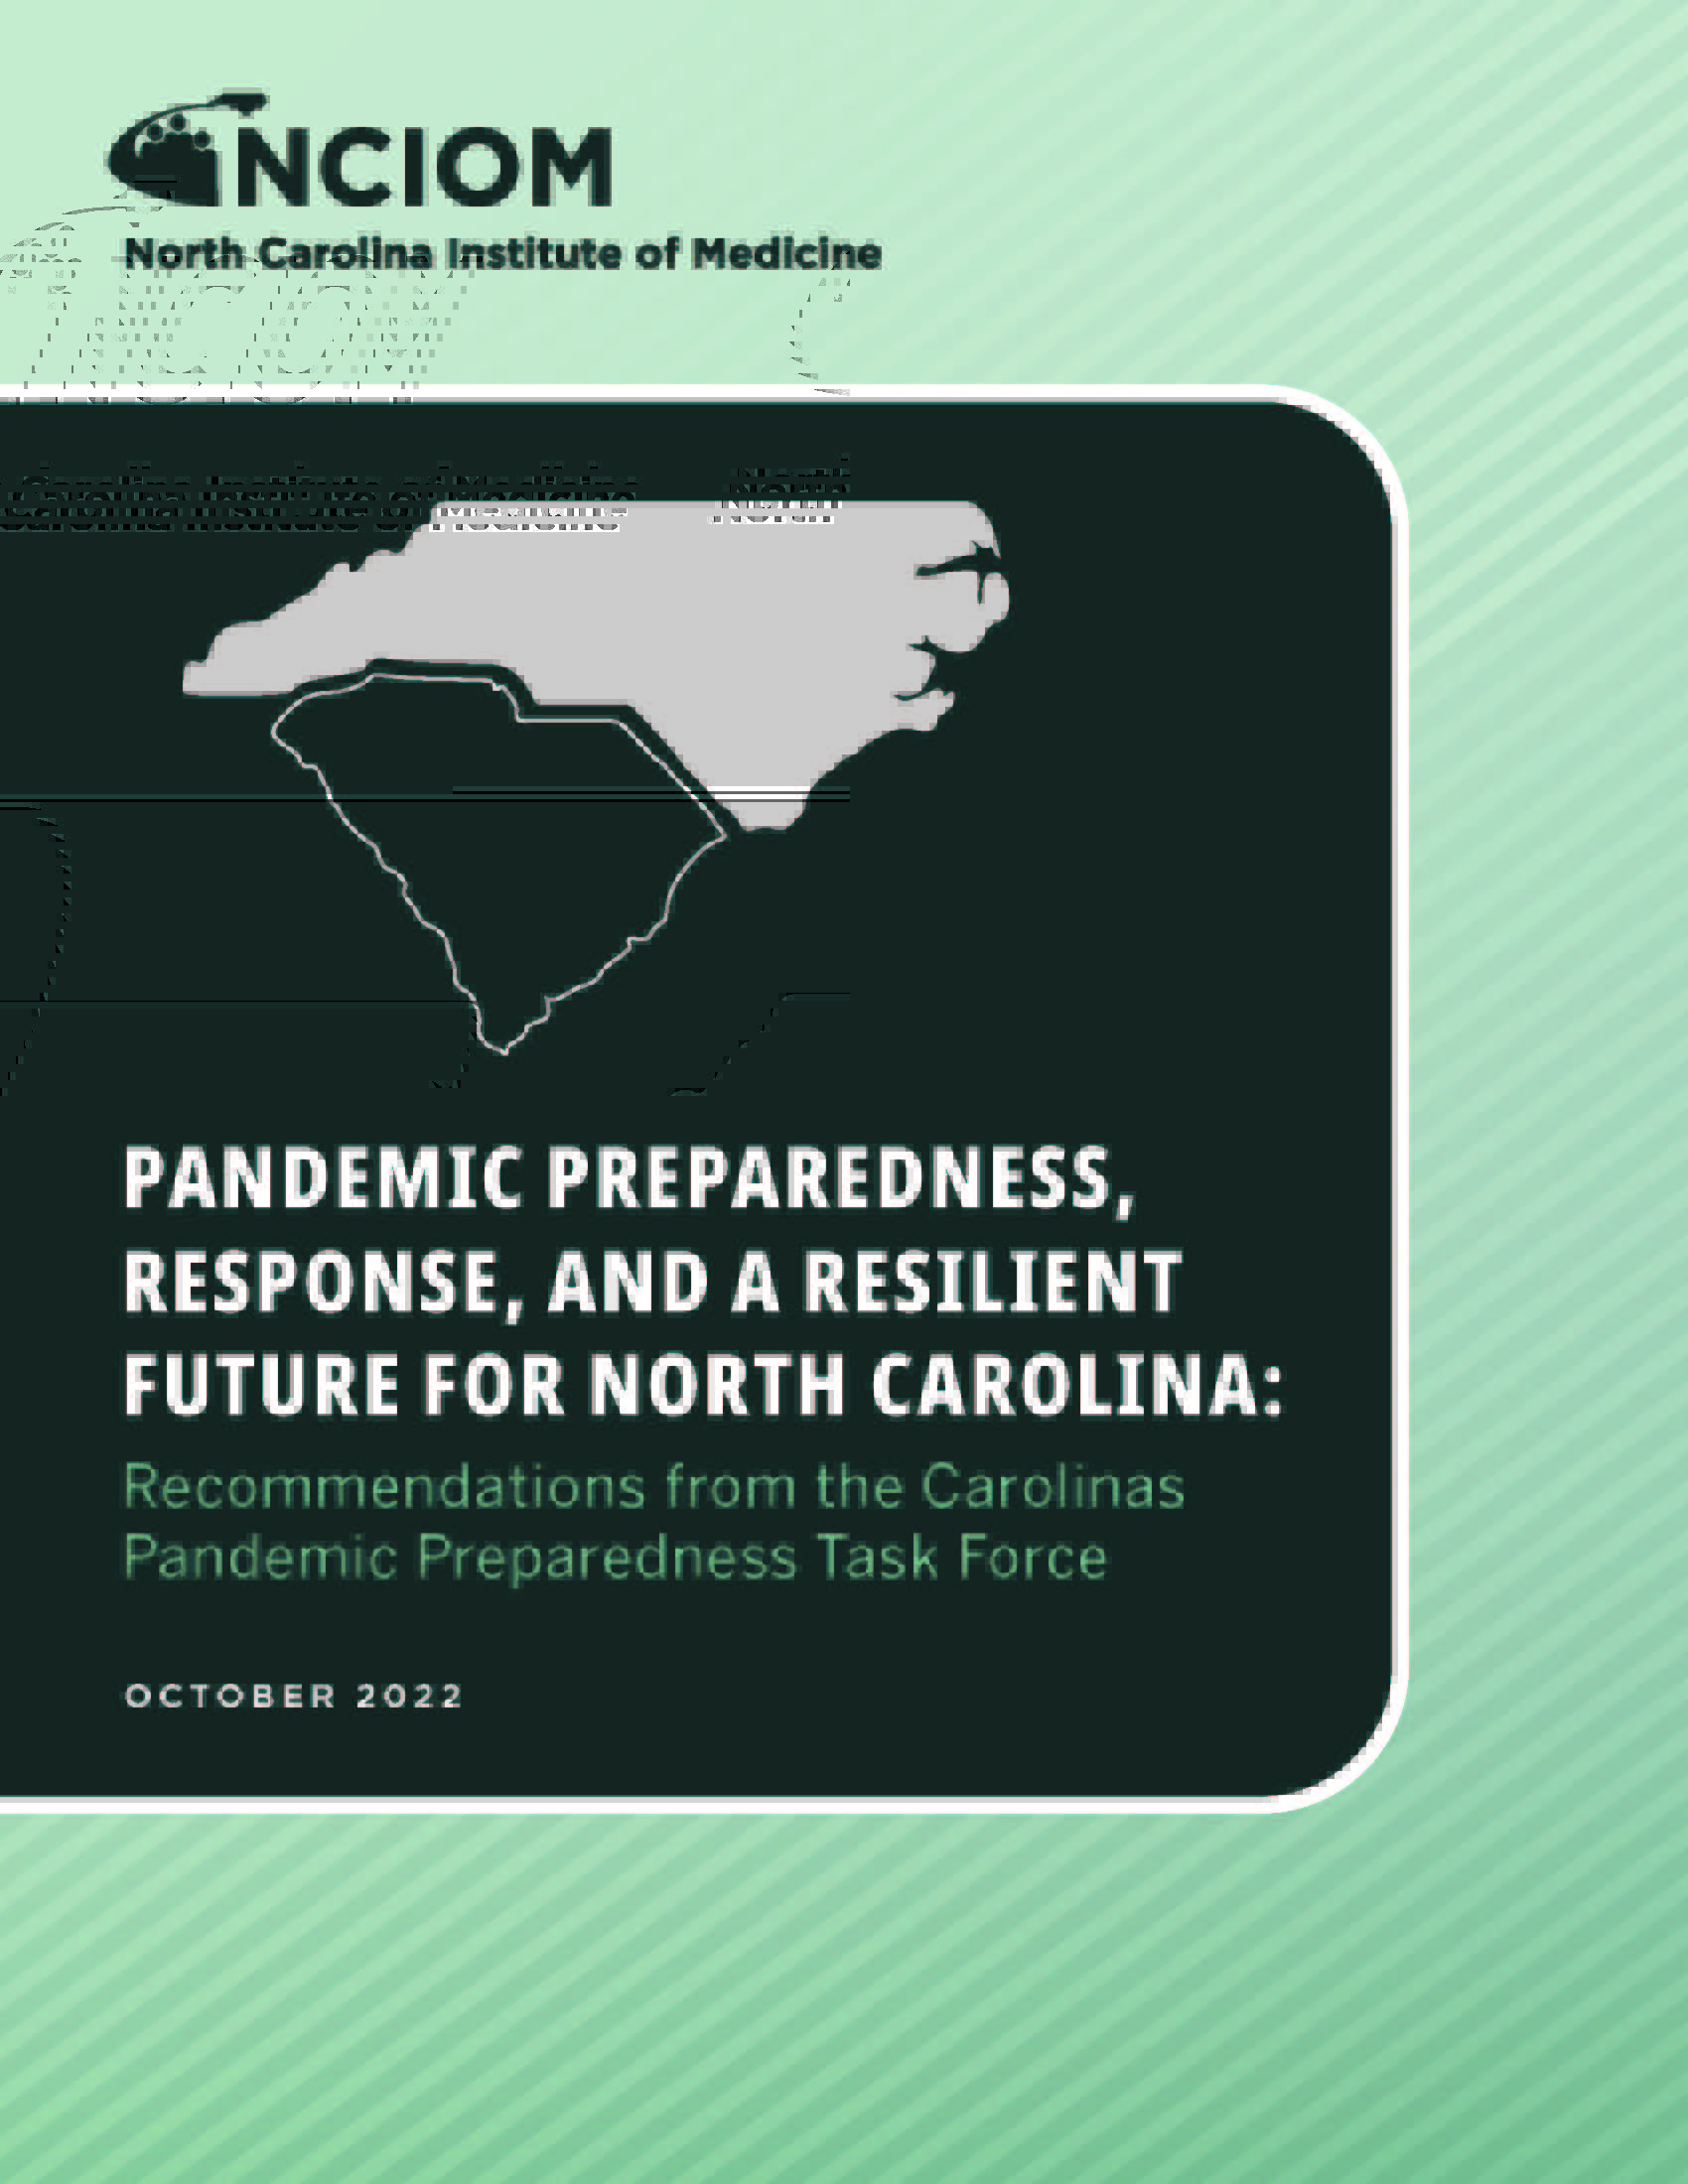 Pandemic Preparedness, Response, and a Resilient Future for North Carolina: Recommendations from the Carolinas Pandemic Preparedness Task Force